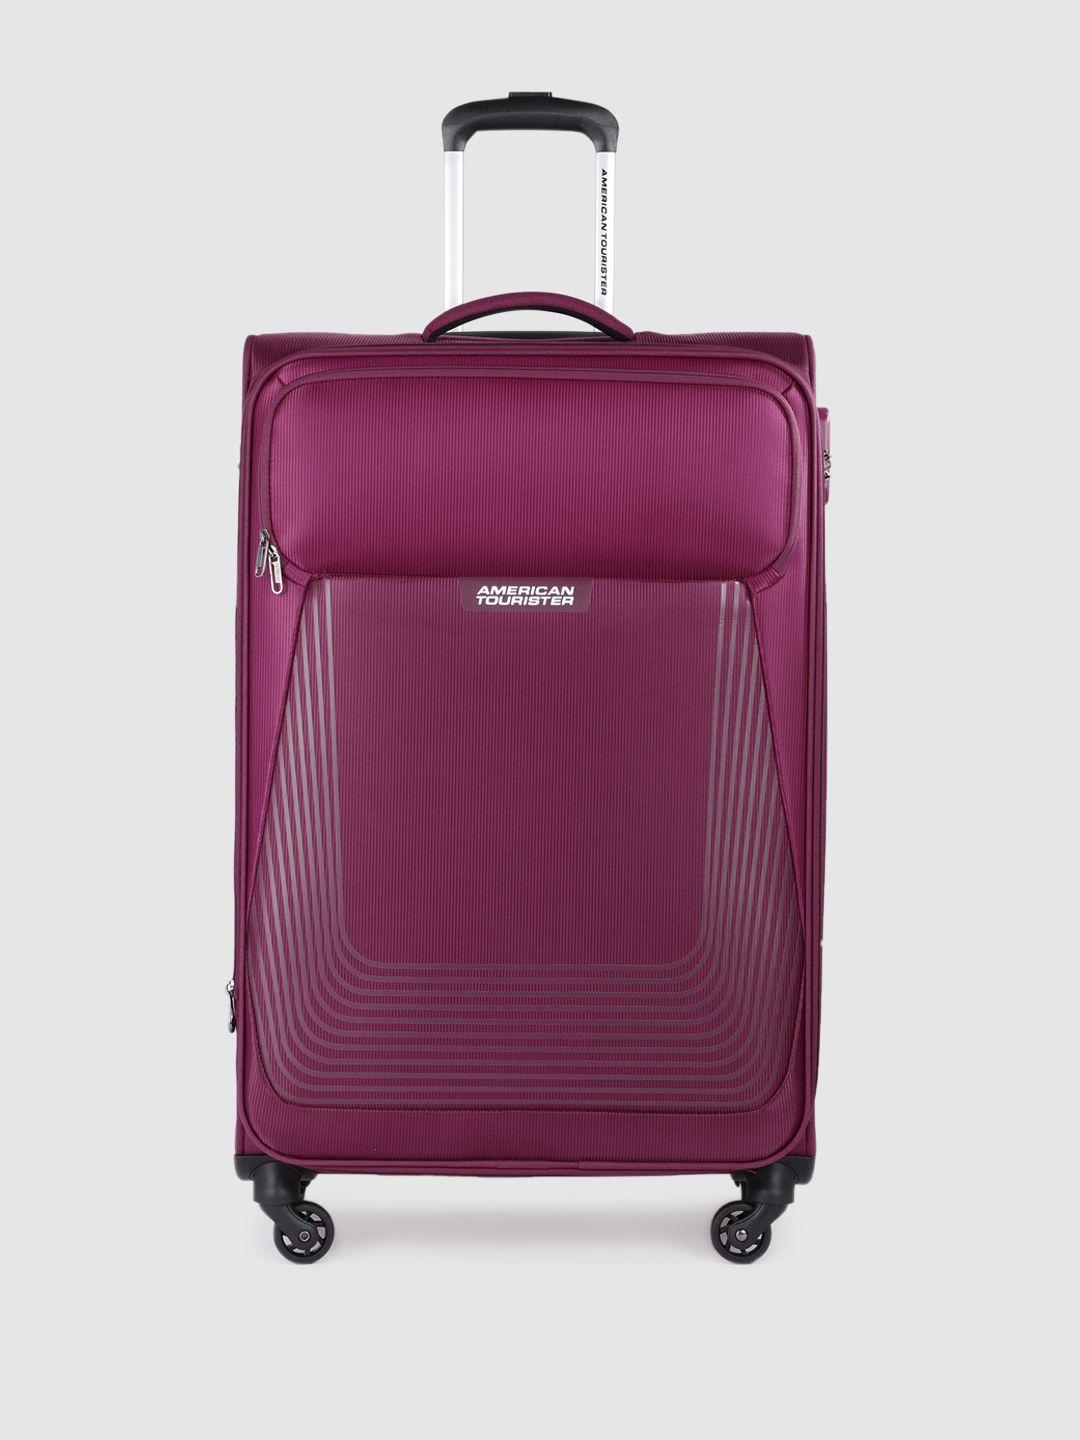 american-tourister-southside-lite-striped-large-trolley-suitcase